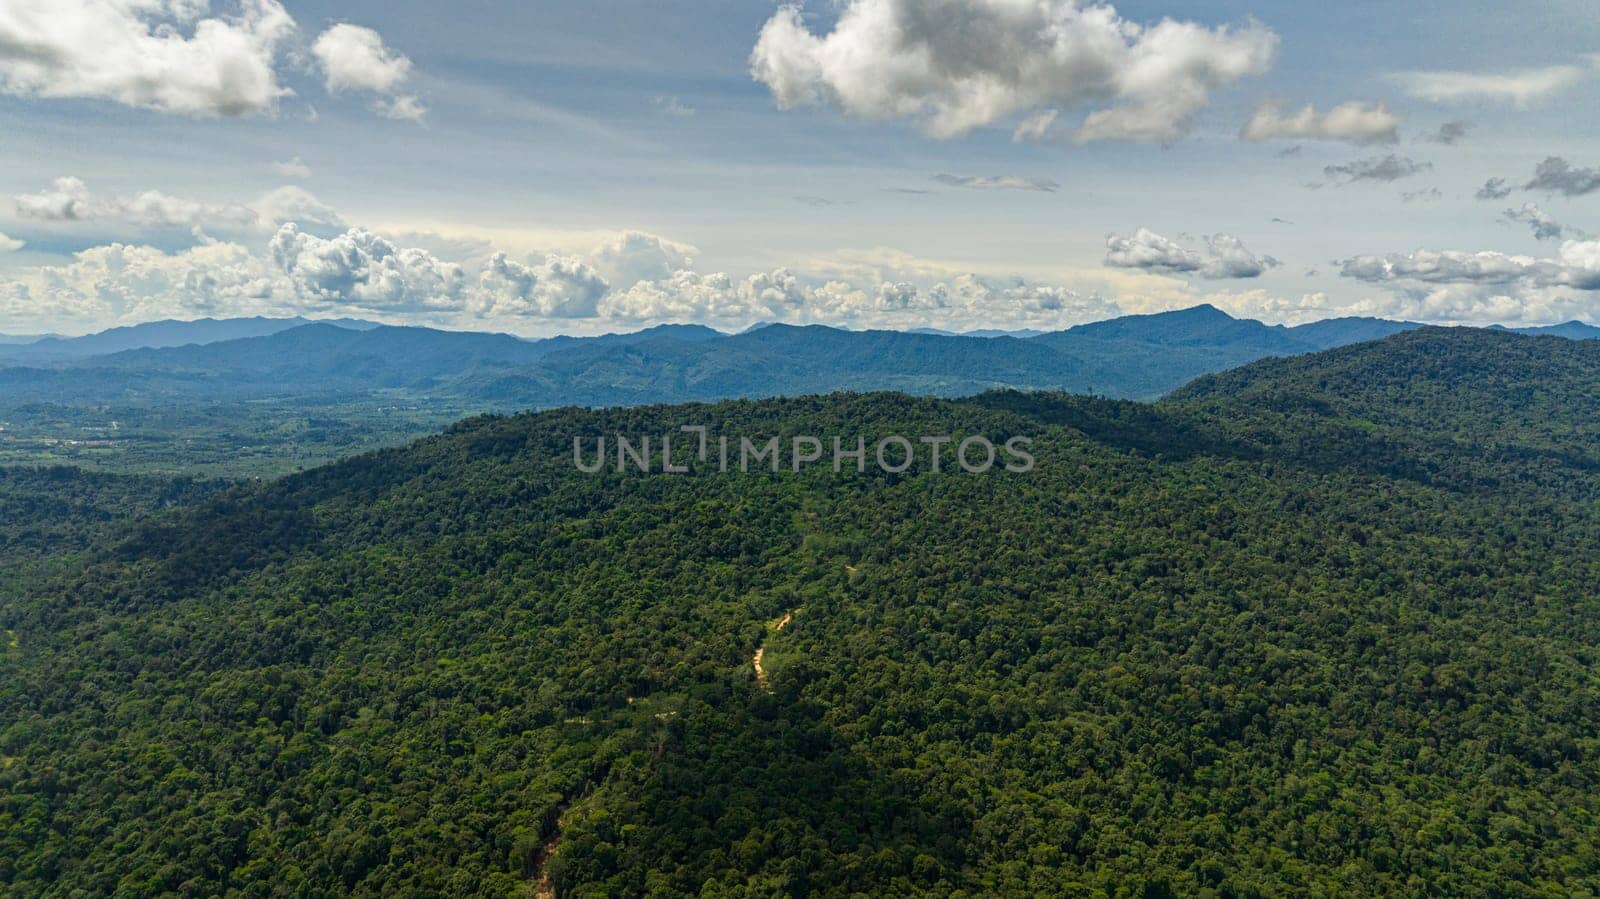 Aerial view of tropical mountain range and mountain slopes with rainforest. Borneo, Malaysia.